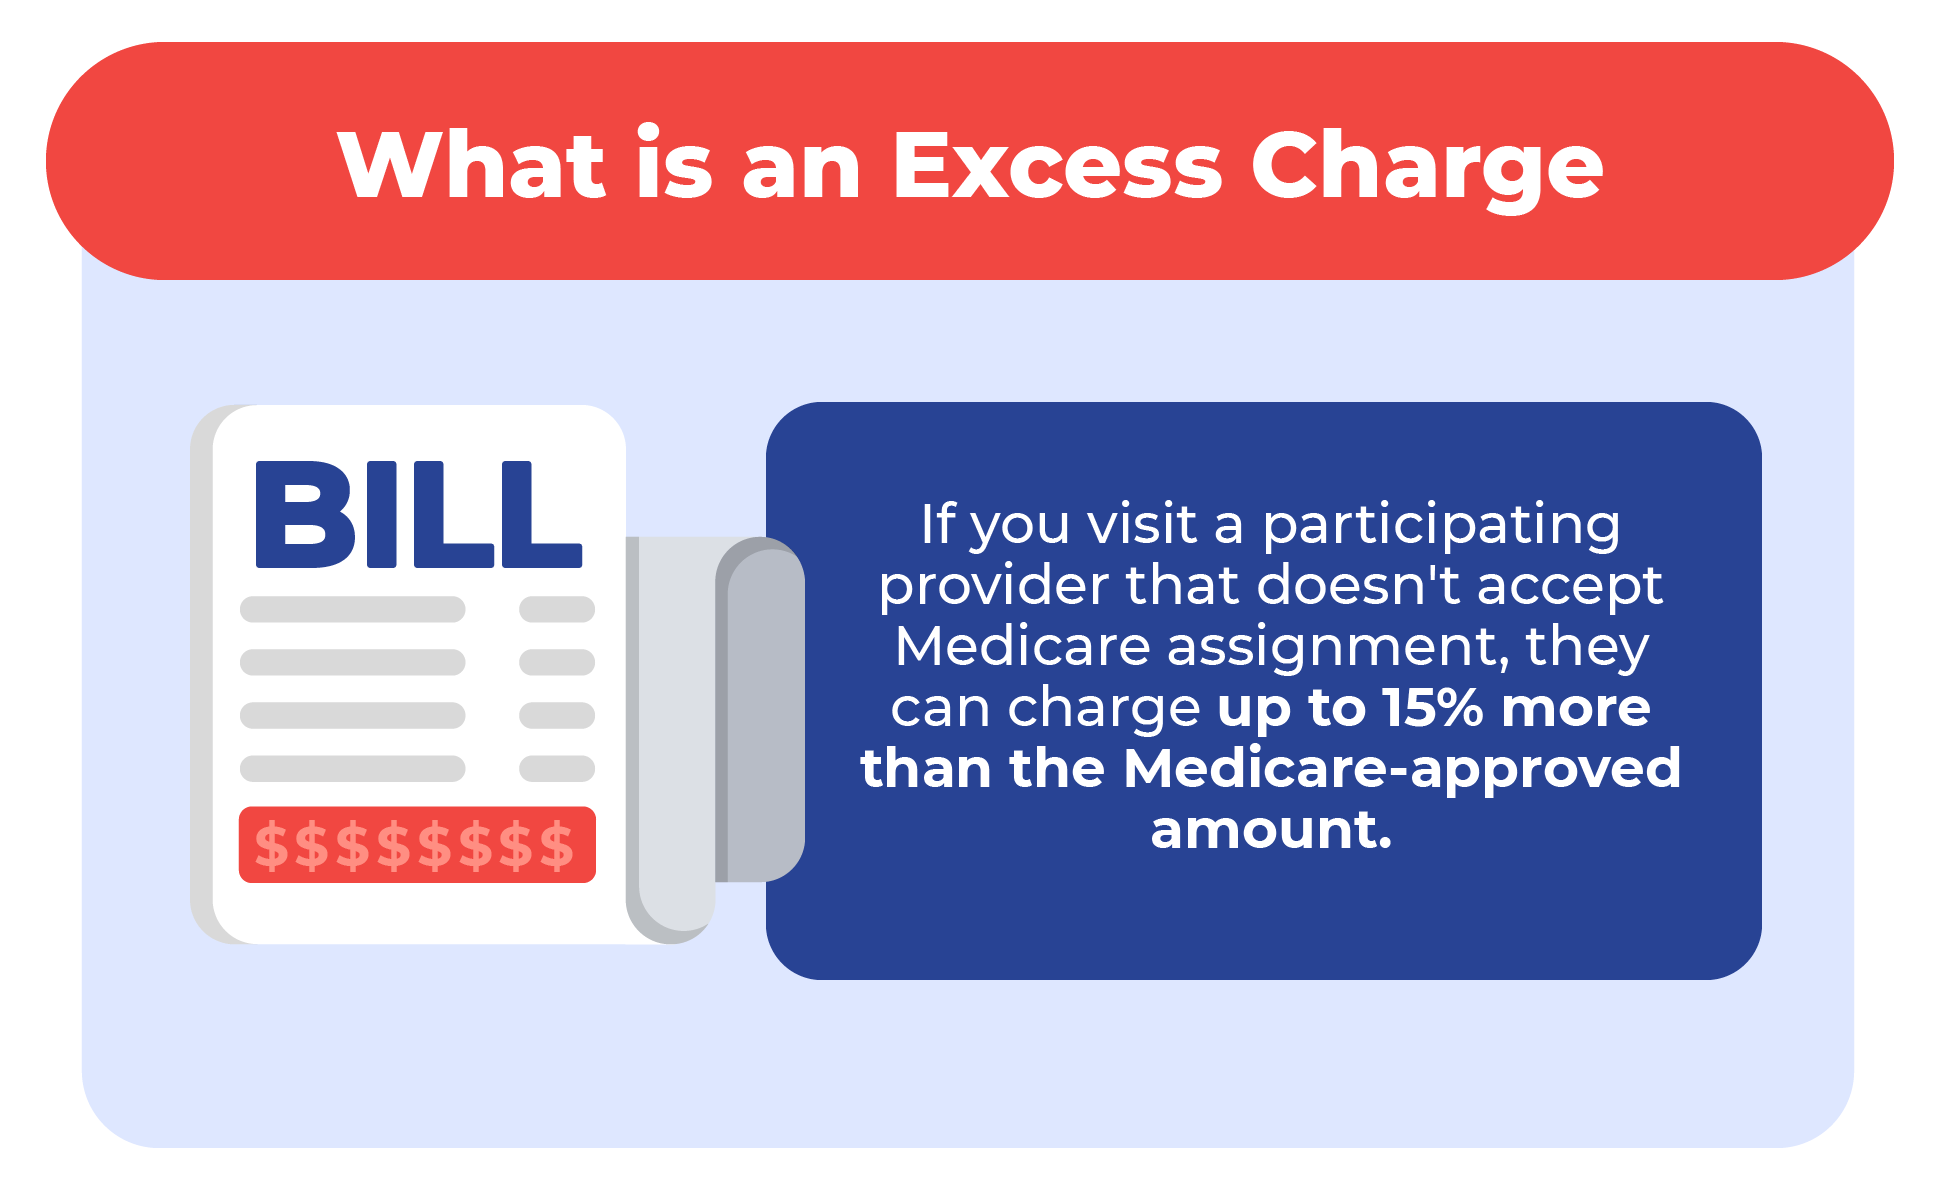 what if a provider does not accept medicare assignment